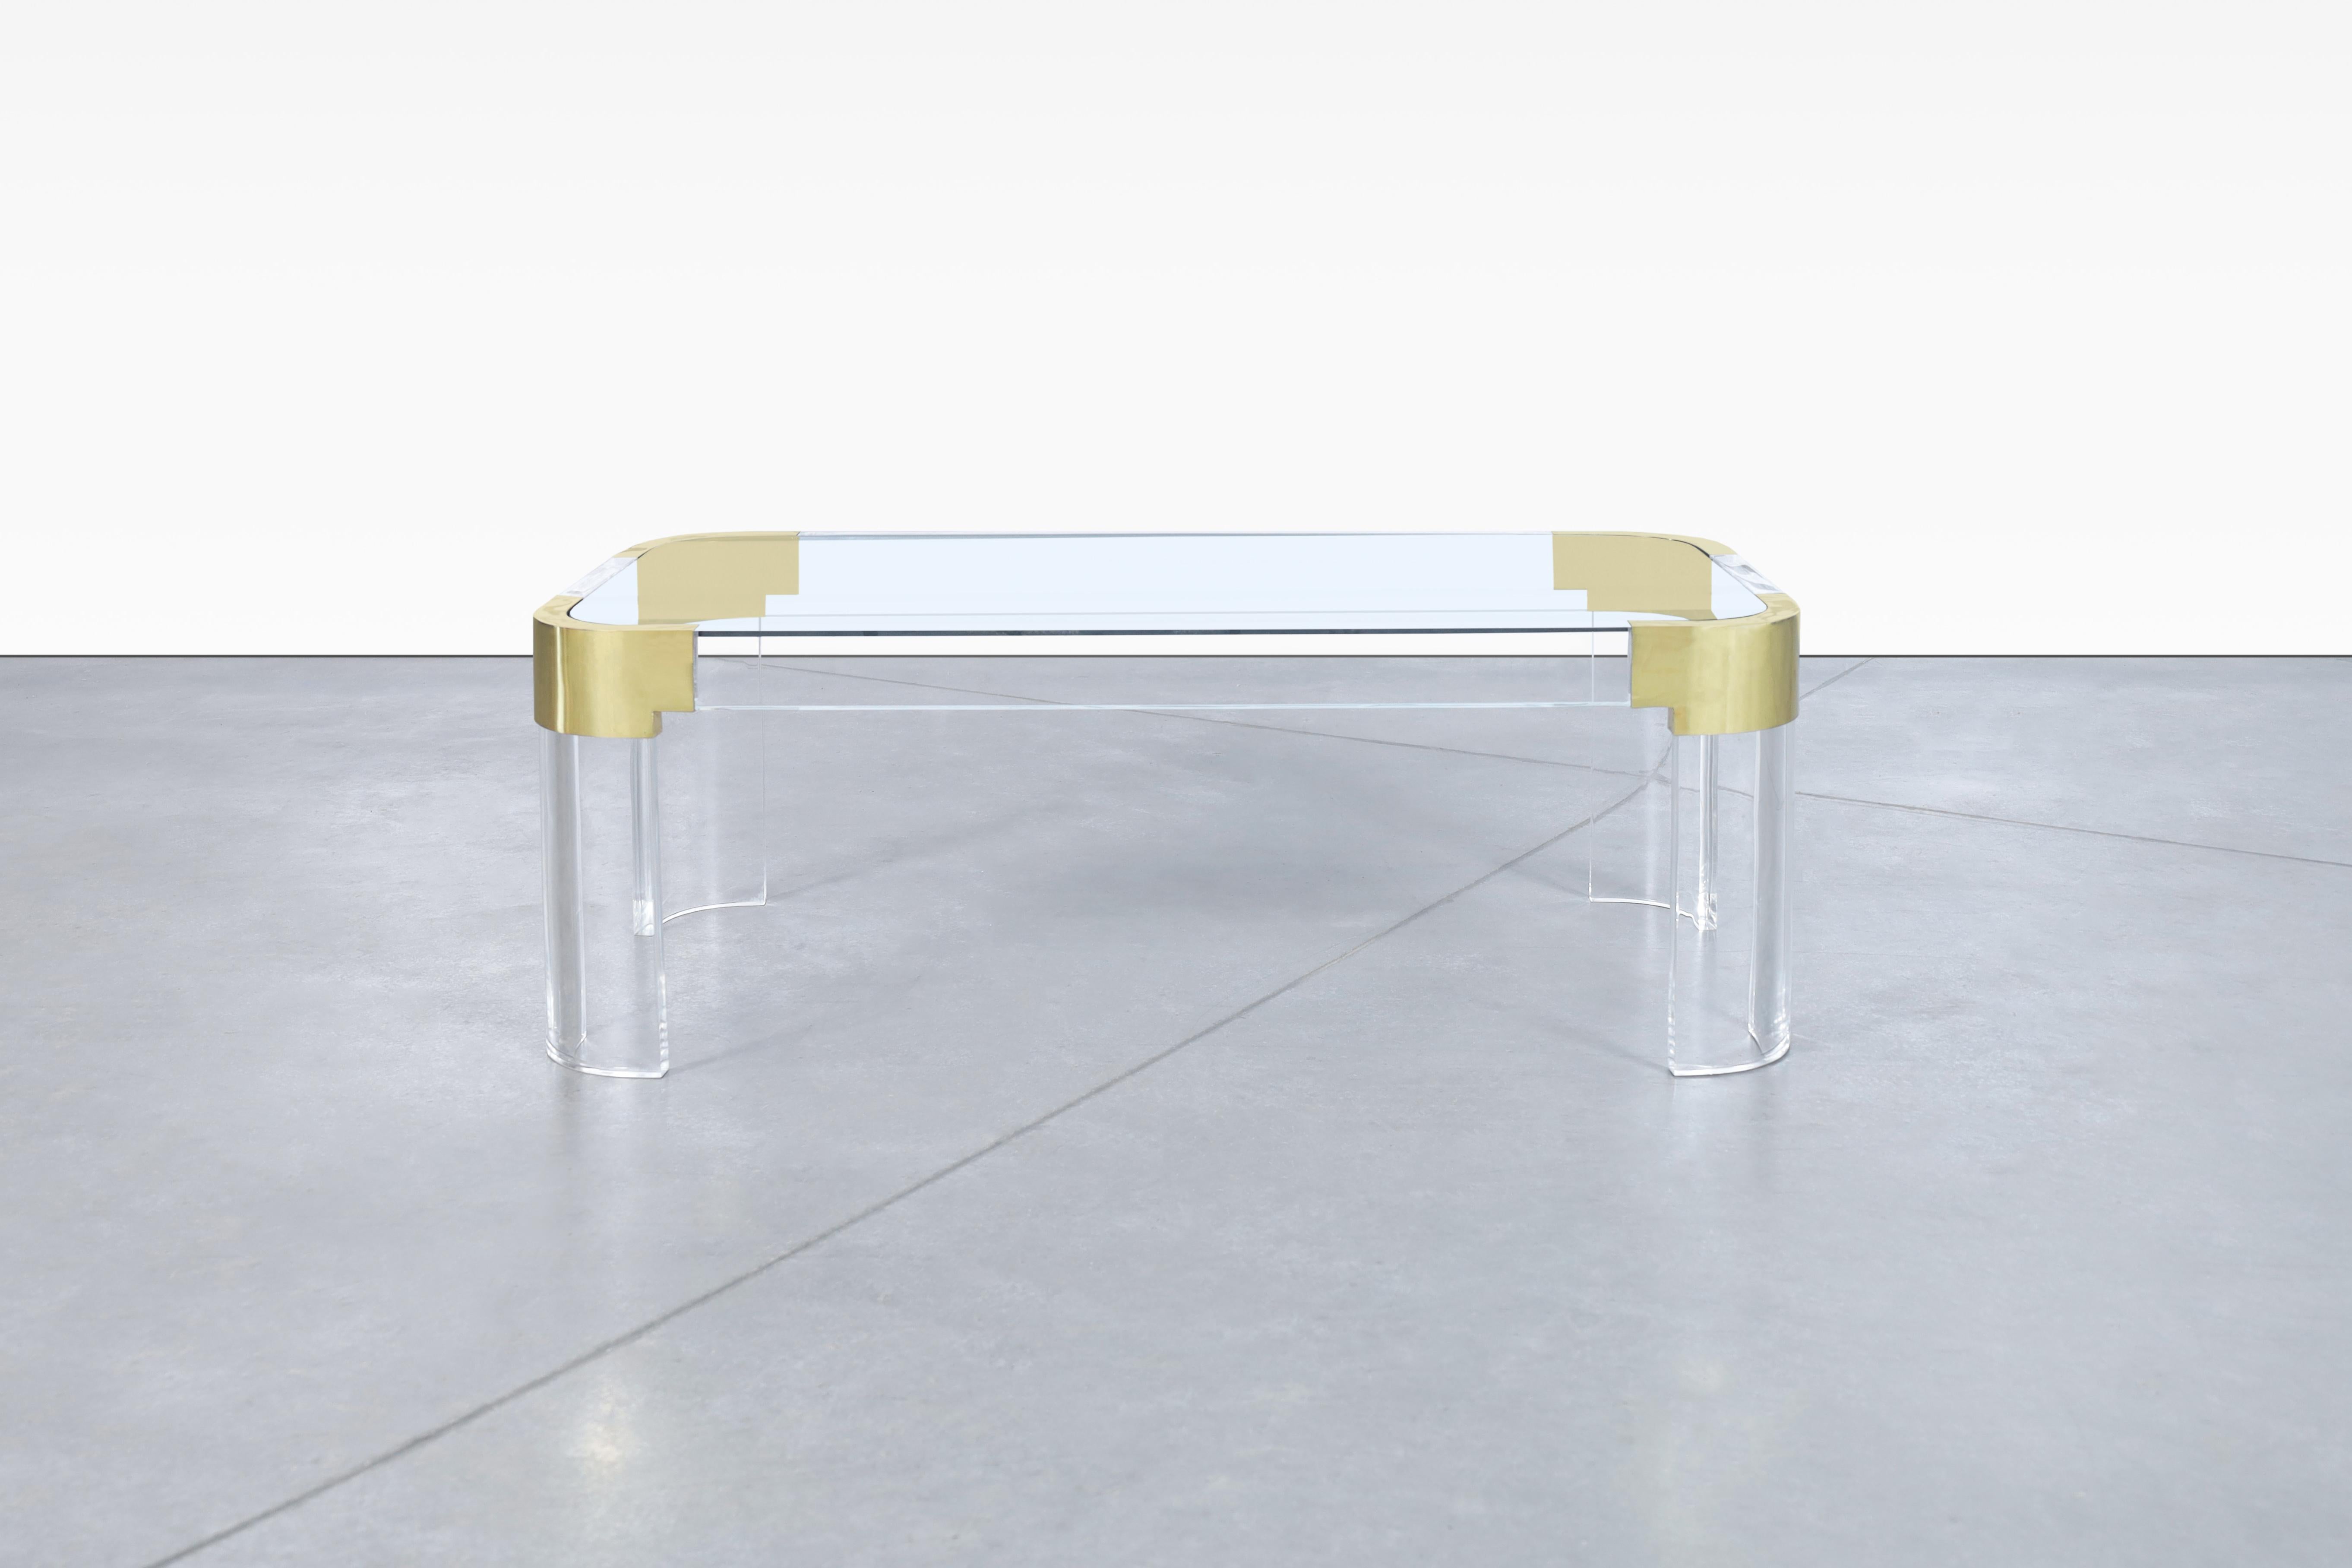 Beautiful vintage brass and lucite coffee table designed by Charles Hollis Jones and manufactured in the United States, circa 1970s. Introducing a coffee table like no other - one that showcase elegance and refinement. This coffee table is a part of